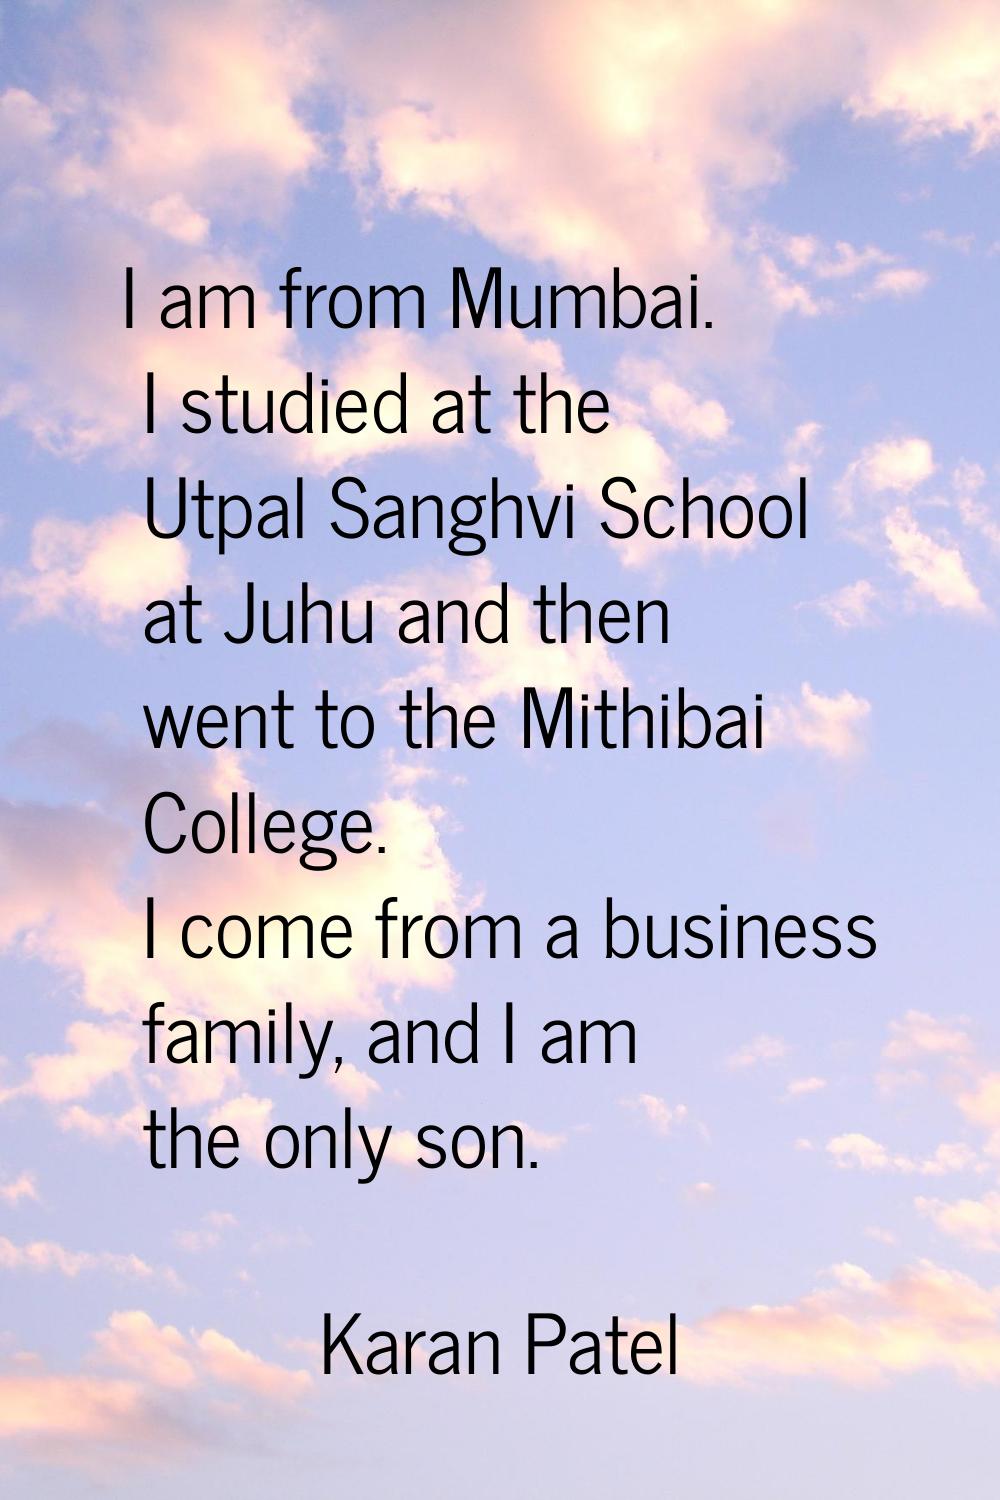 I am from Mumbai. I studied at the Utpal Sanghvi School at Juhu and then went to the Mithibai Colle